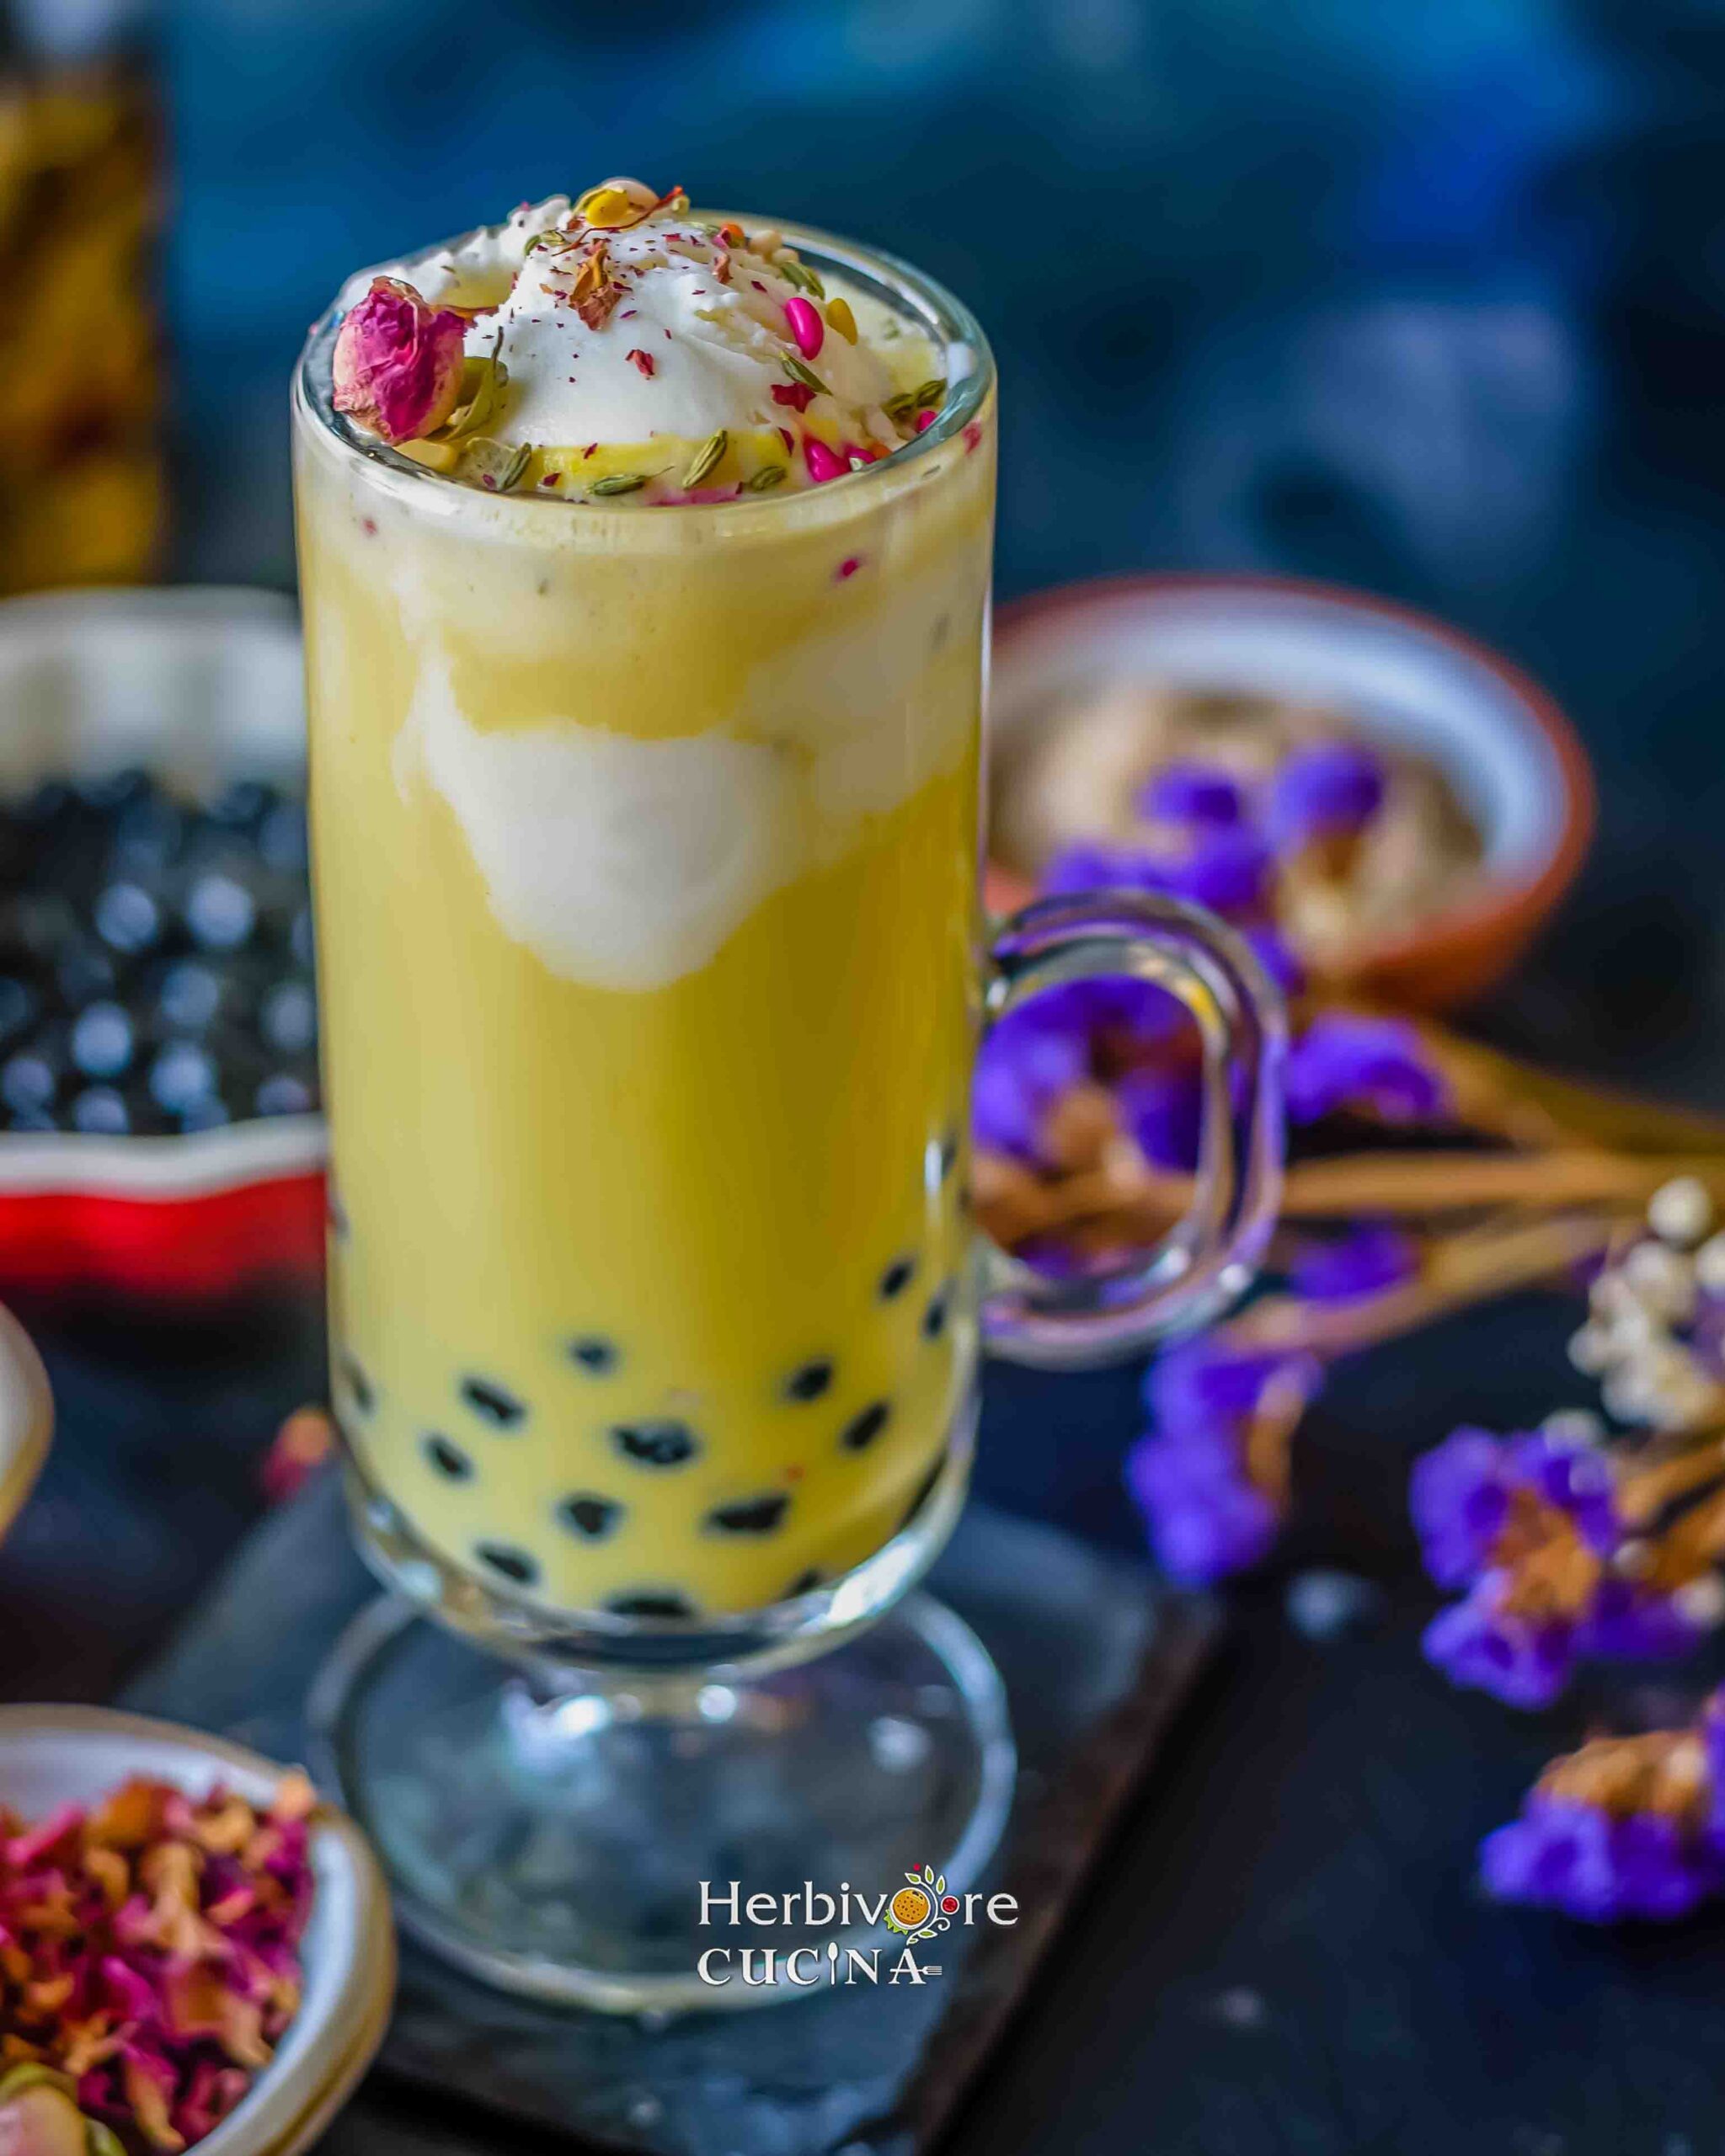 Boba thandai topped with ice-cream and all the toppings, against a backdrop with flowers and boba.